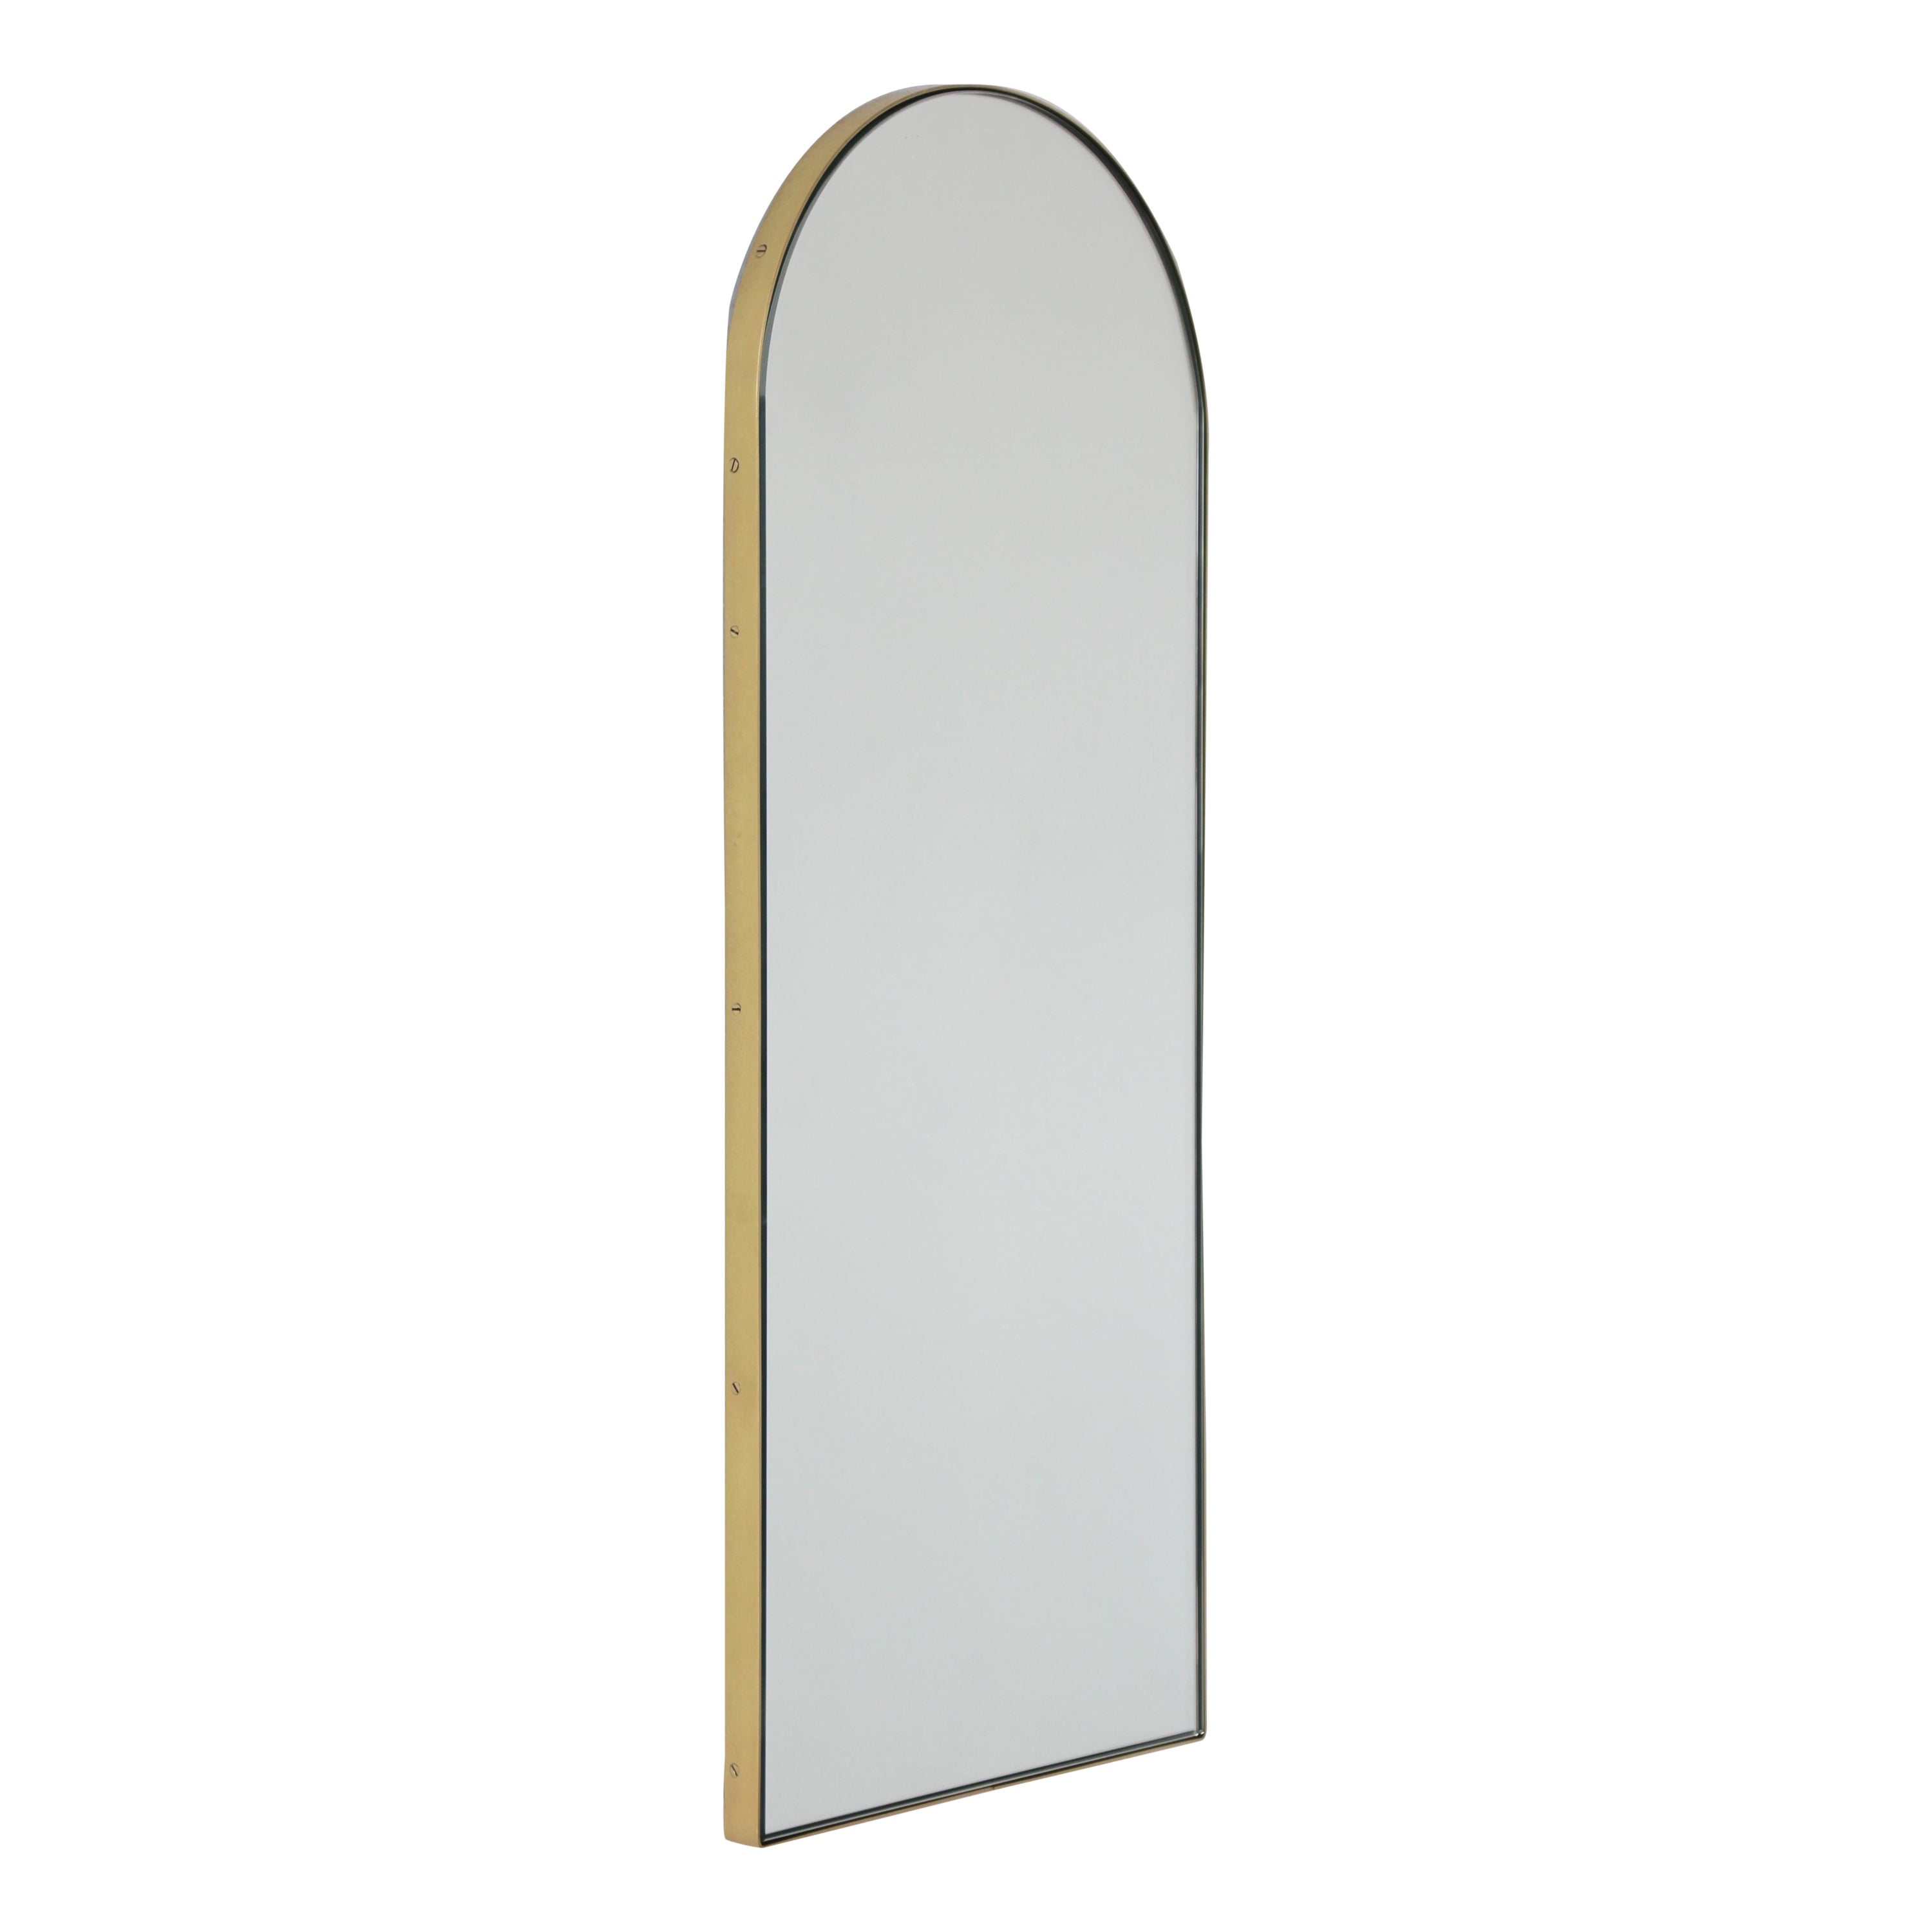 Arcus Arch shaped Modern Bespoke Mirror with Brass Frame, Large